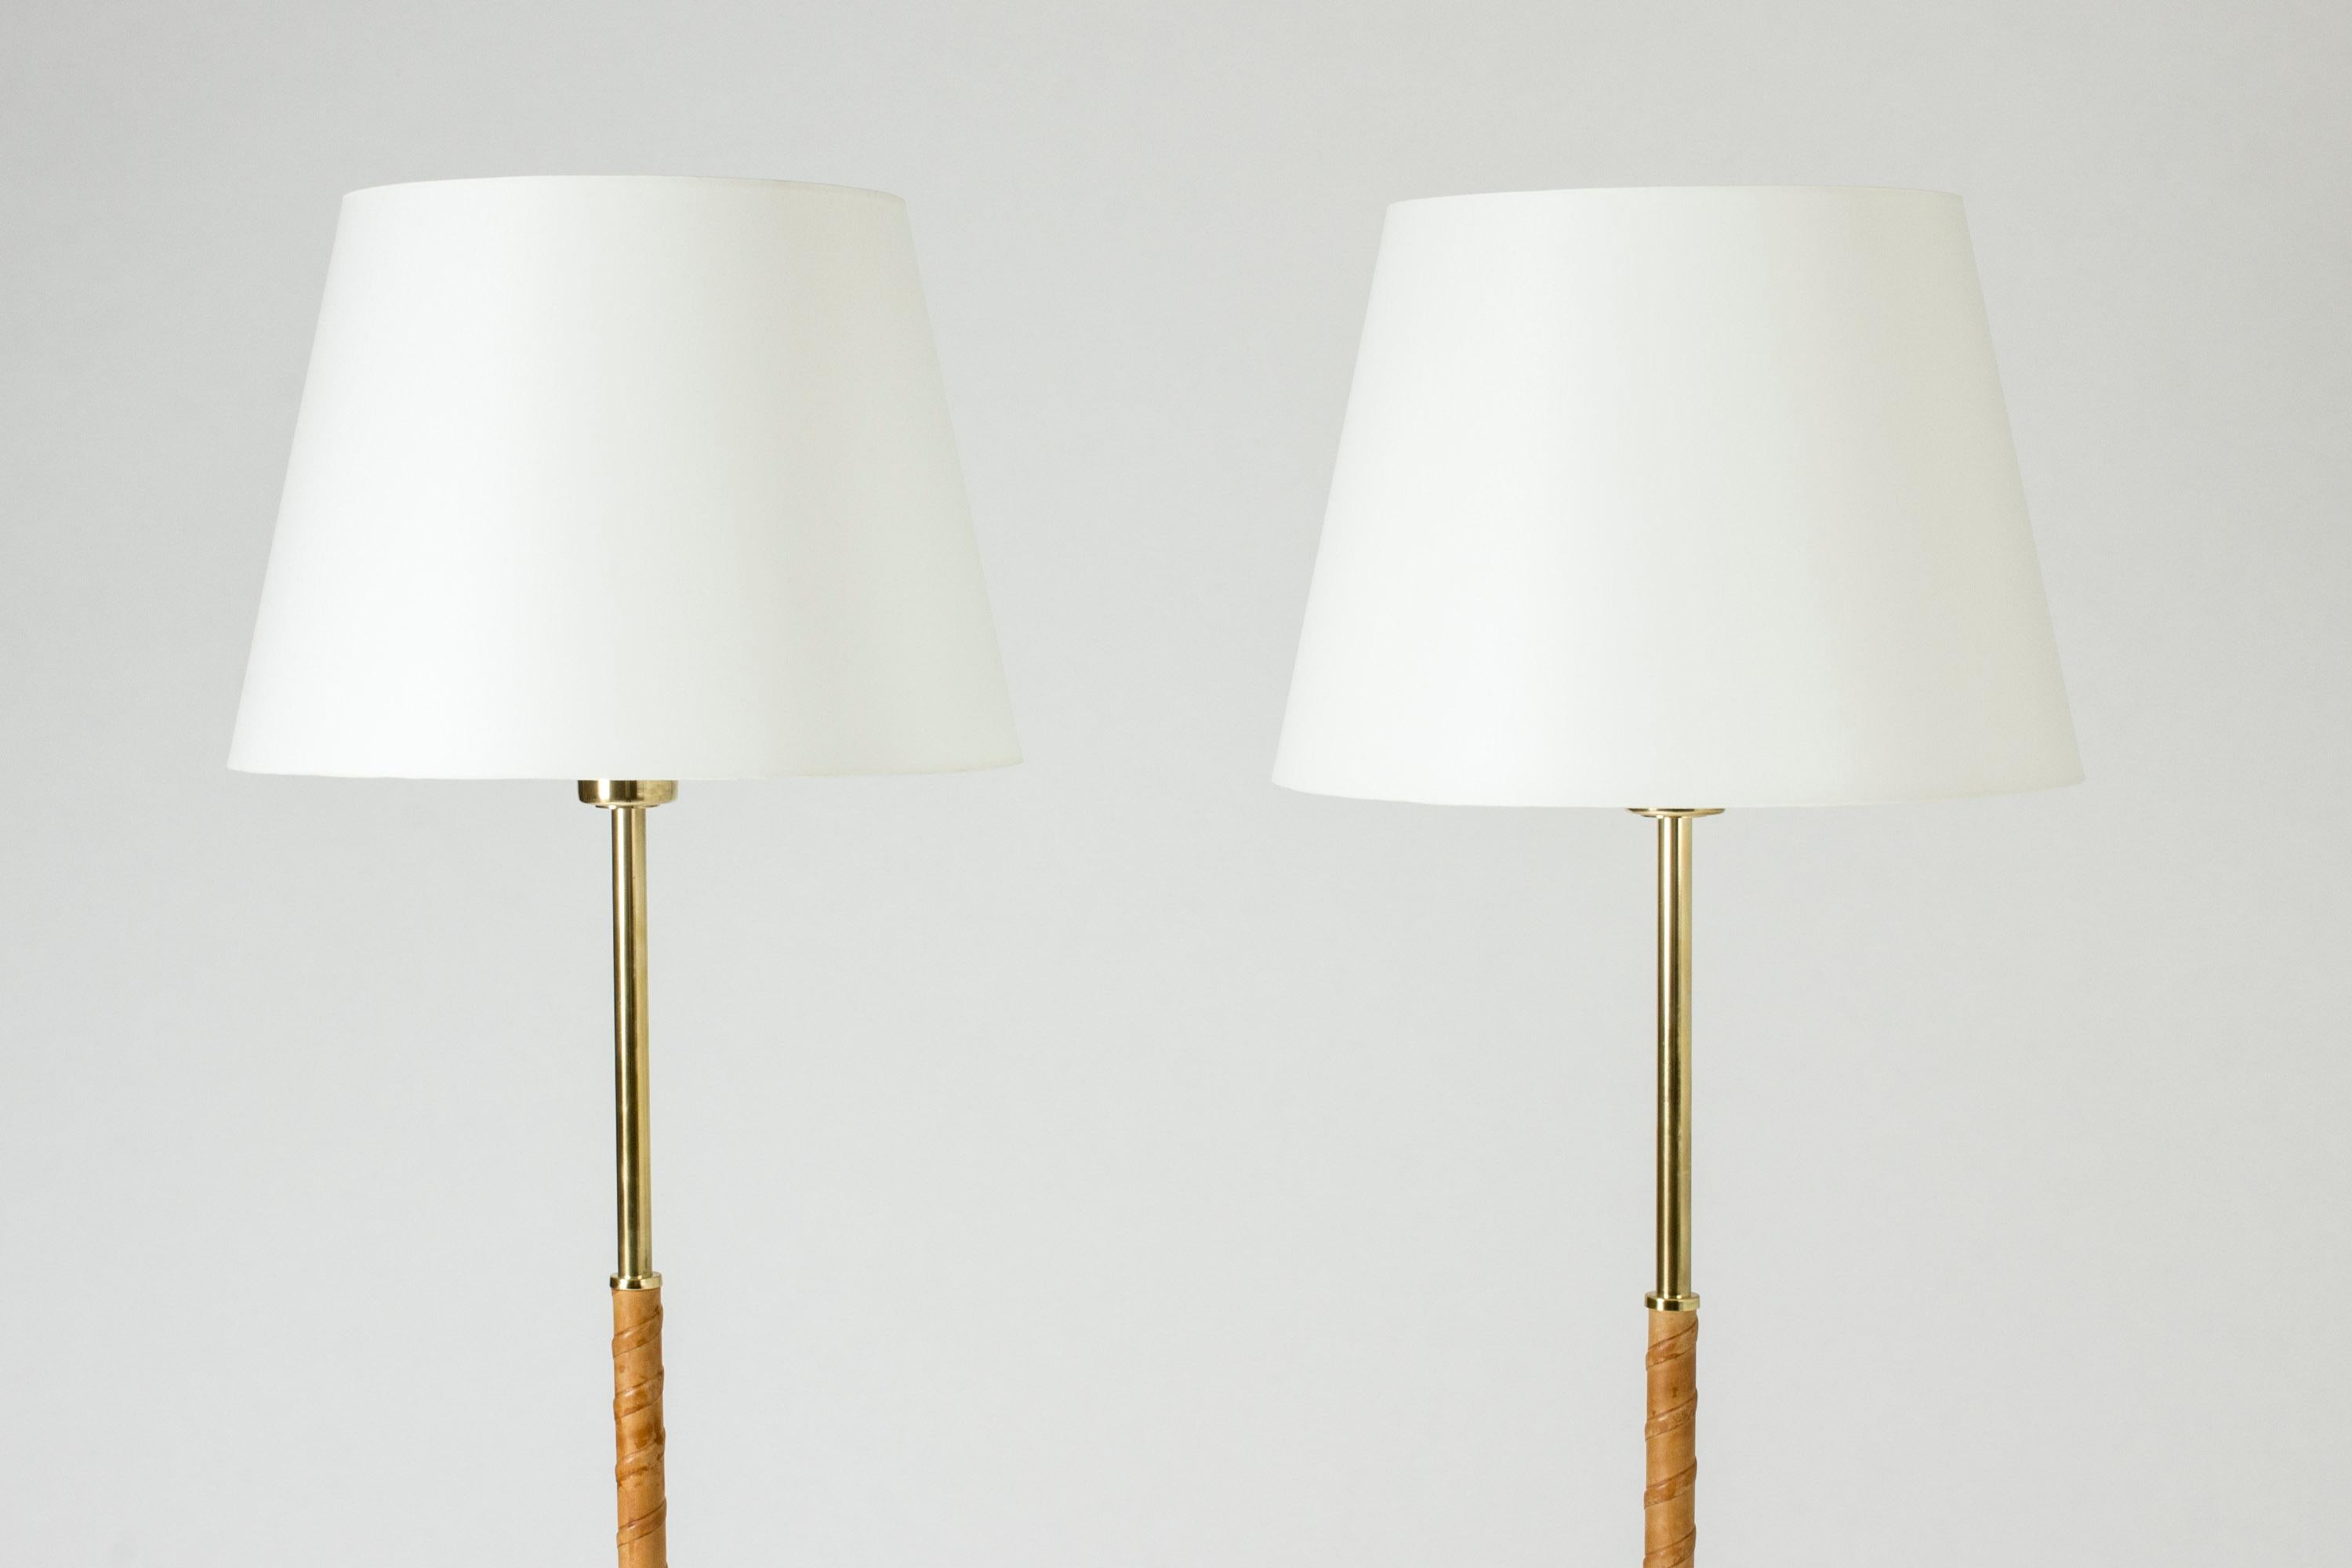 Pair of elegant brass floor lamps from Böhlmarks. Made from brass with natural leather wound handles, smooth brass bases.